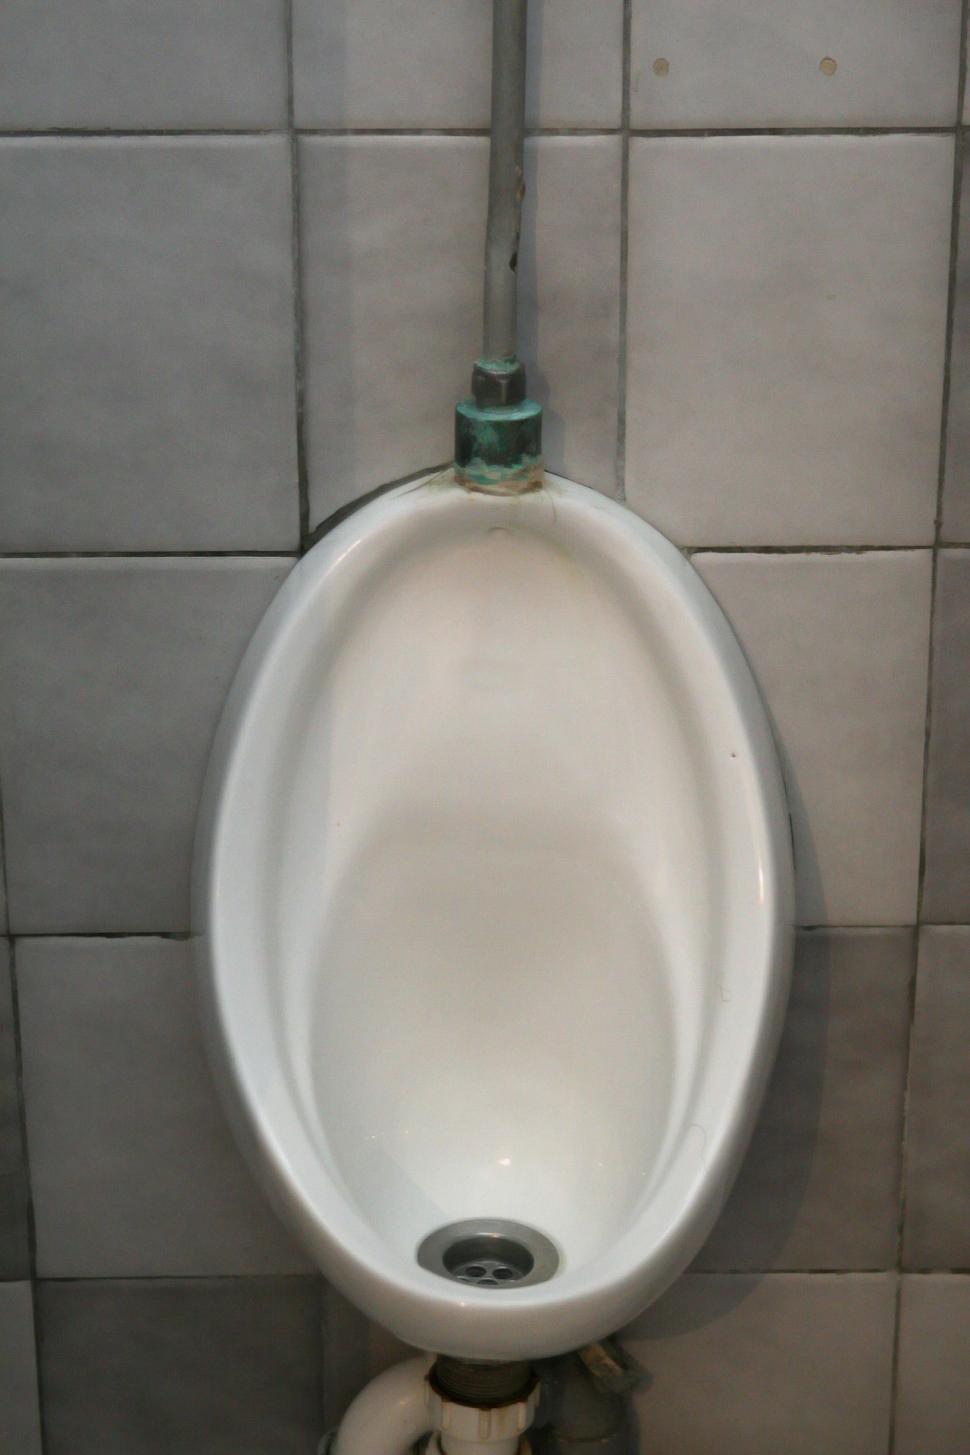 Free Image of White Urinal Mounted to Wall in Bathroom 